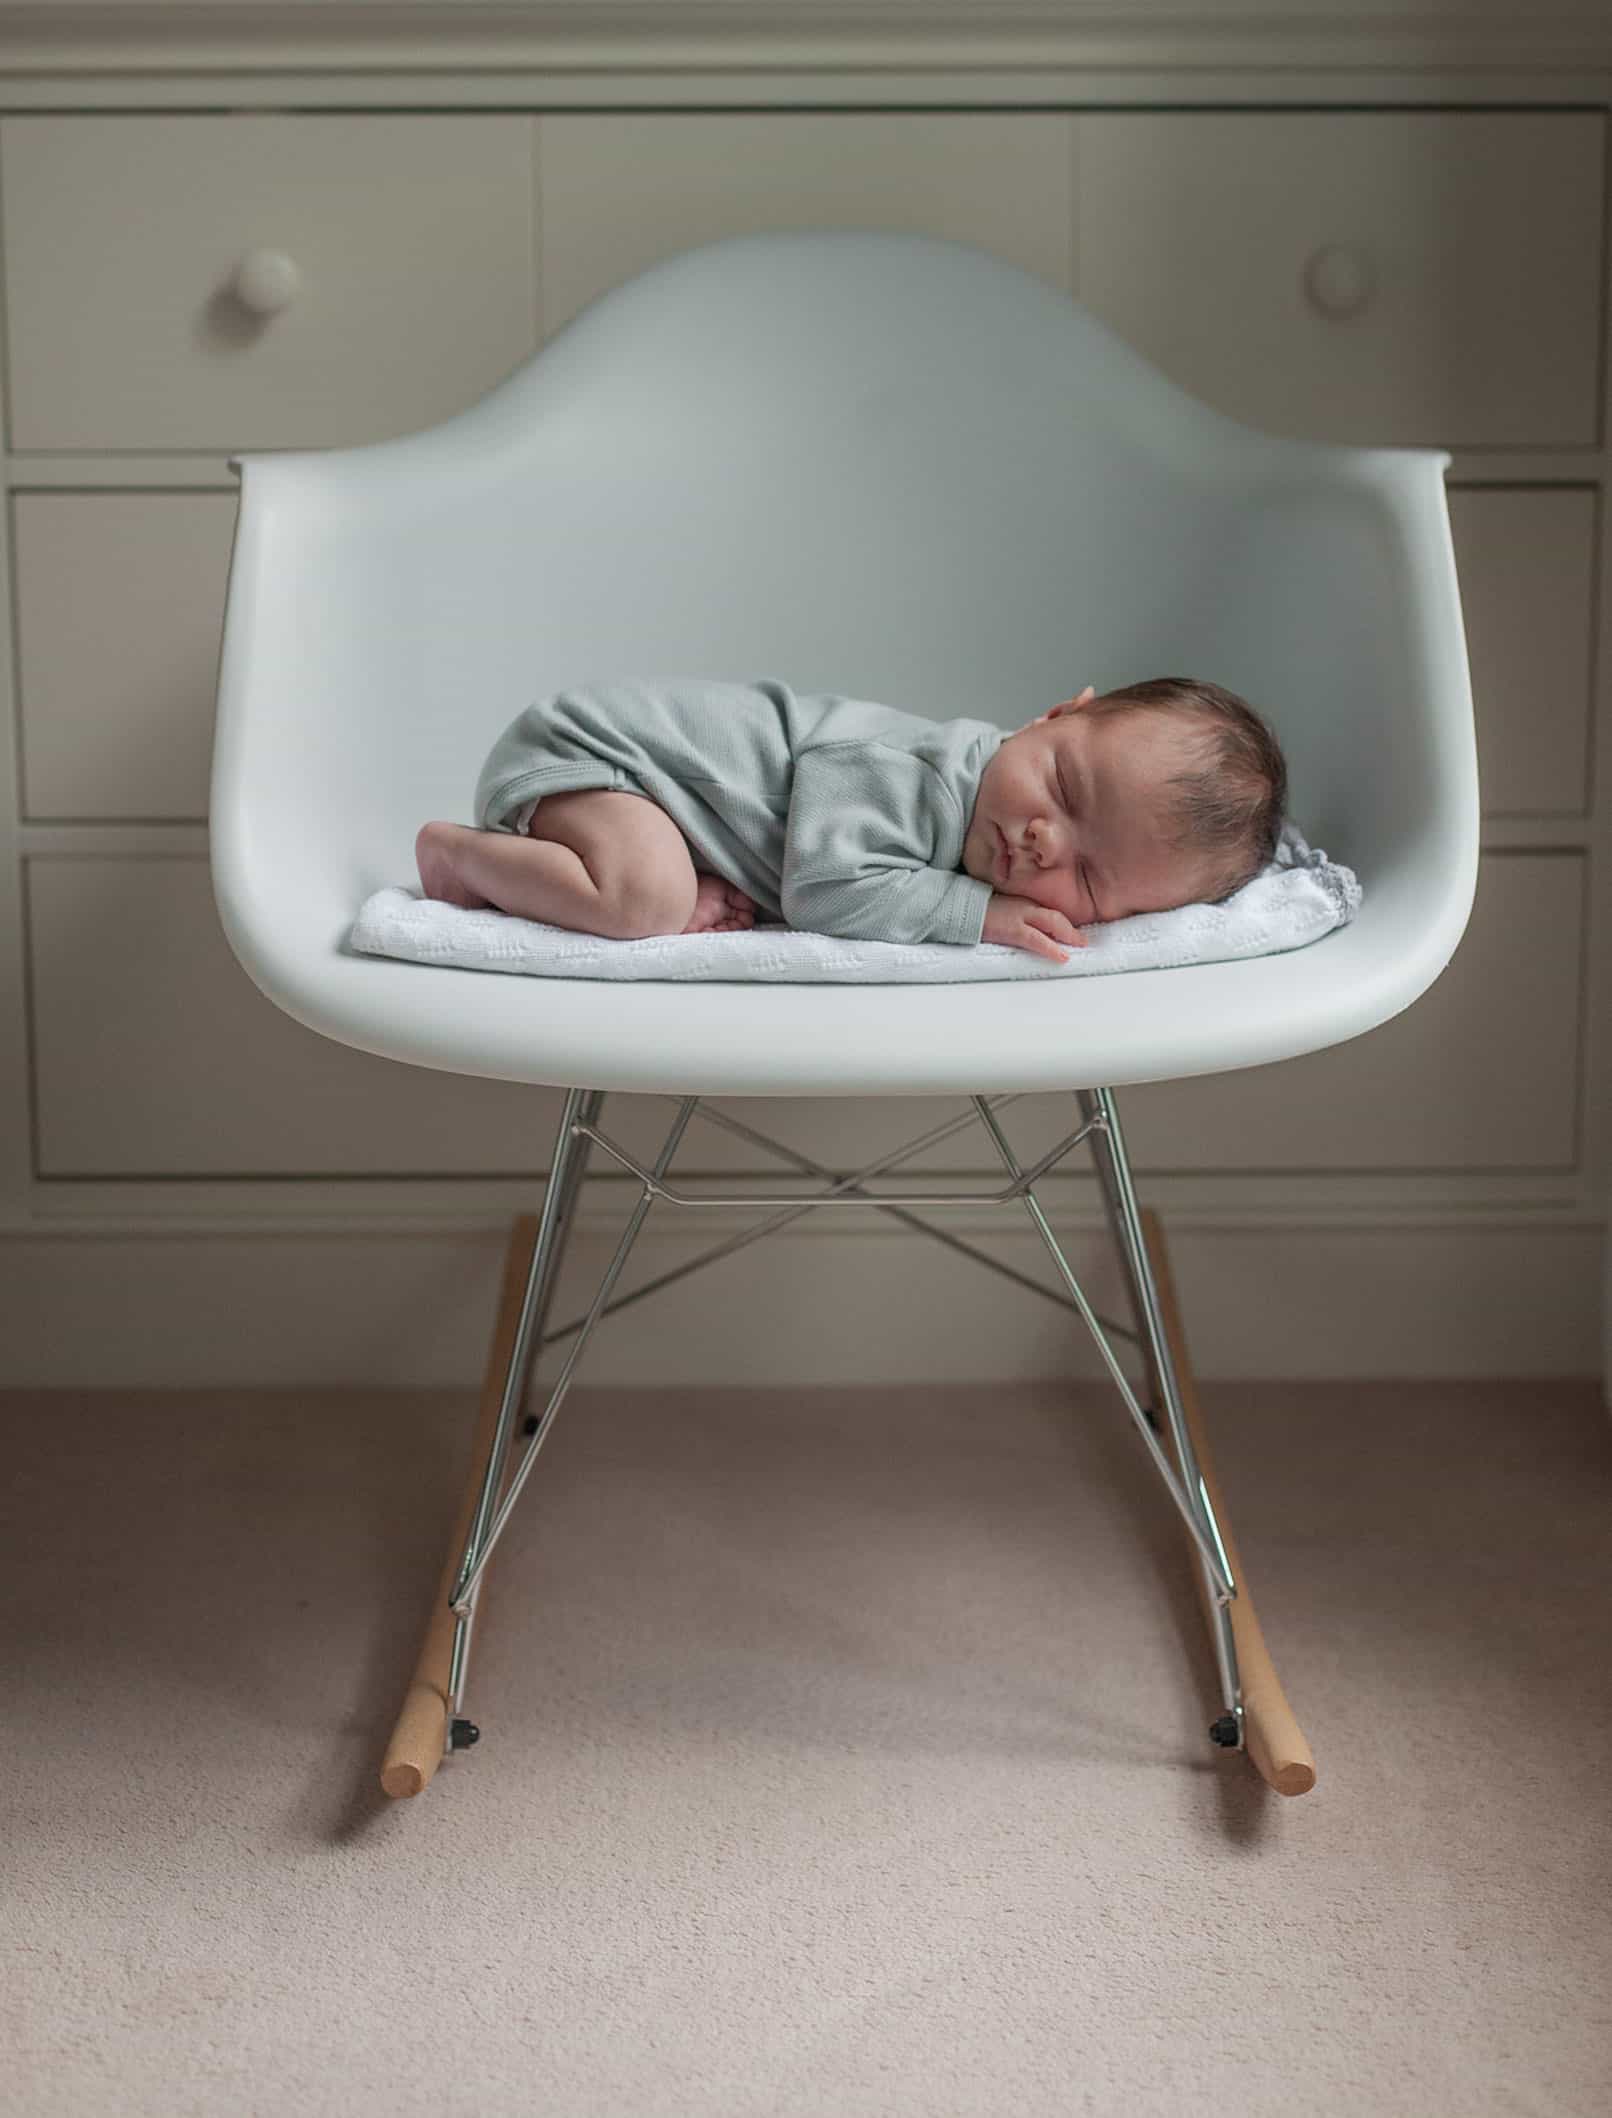 Newborn photos at home. baby on the chair